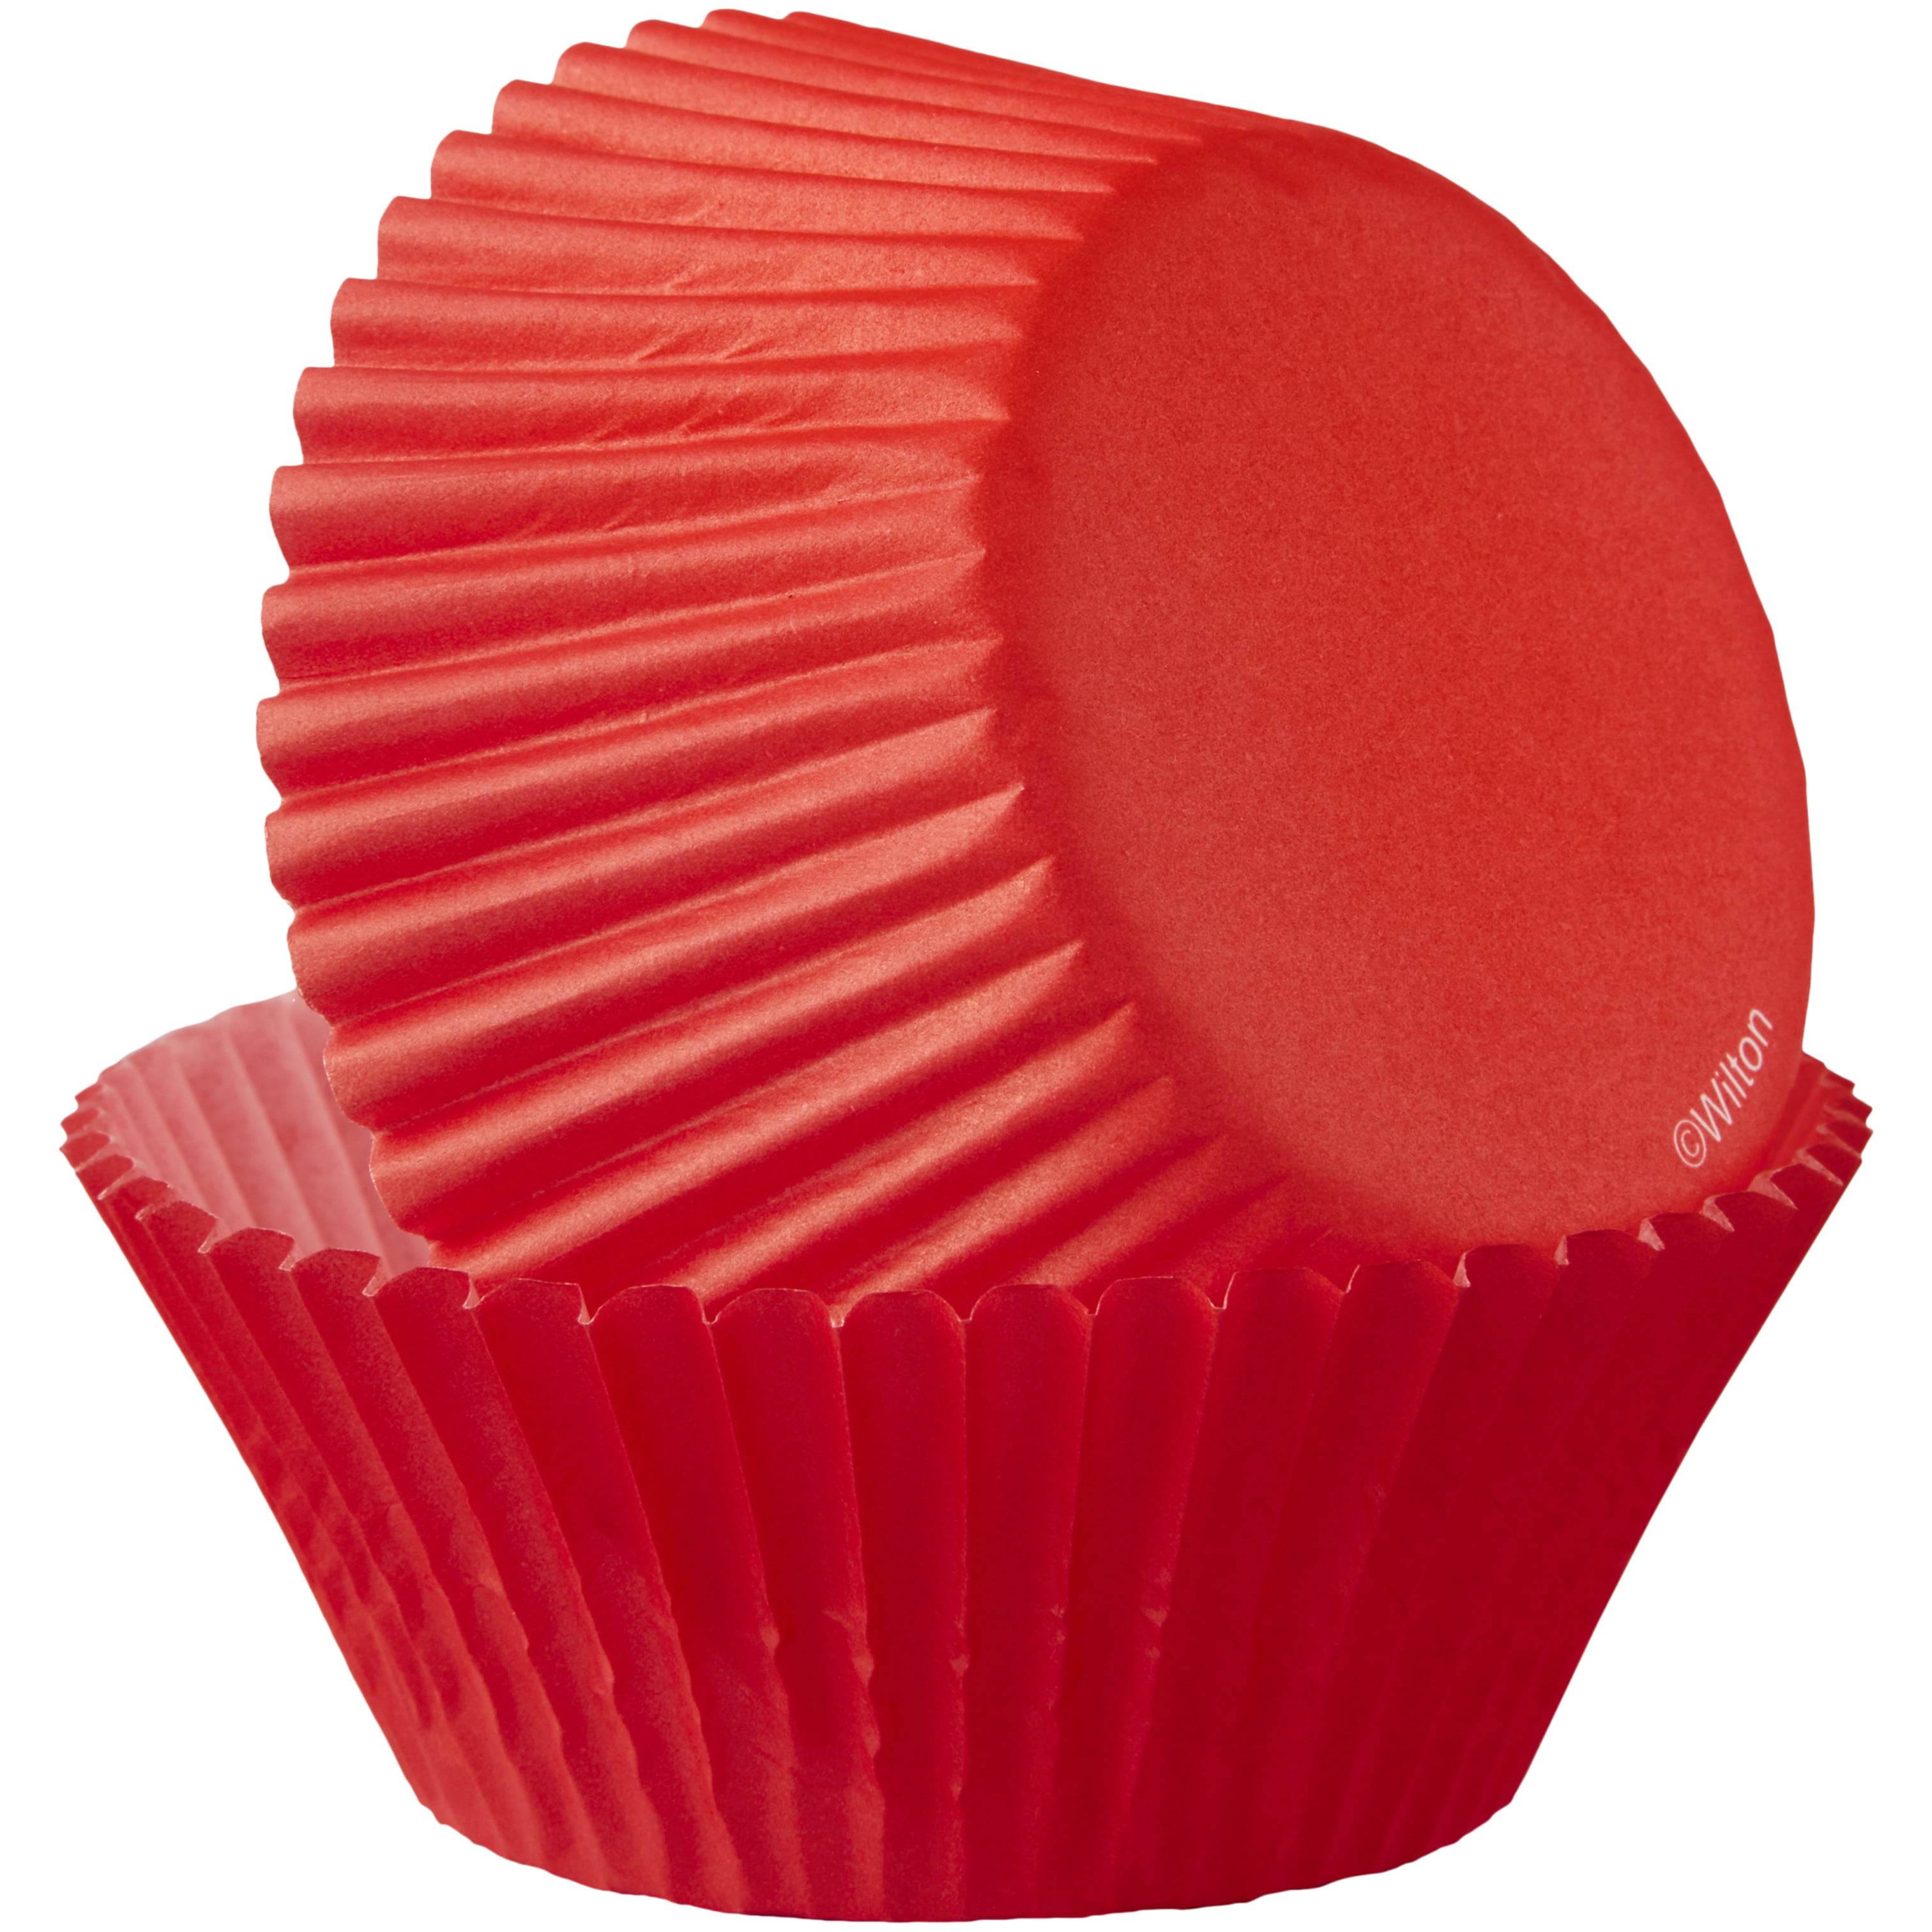 Red Wilton Doily Cupcake Liners Paper 12-Count 0.1 x 16.1 x 20.29 cm 